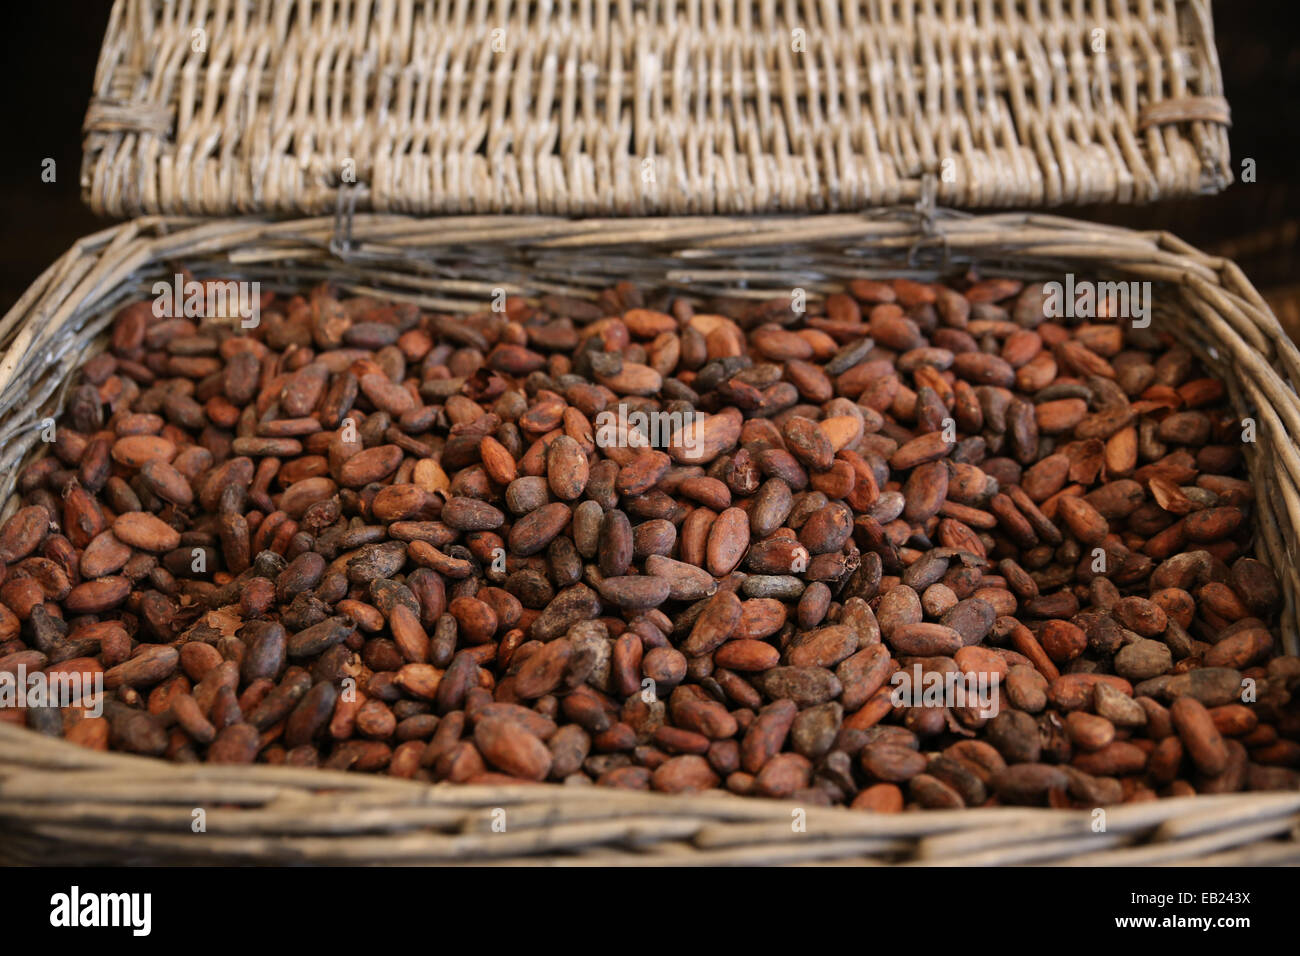 dried cocoa bean inside basket Stock Photo